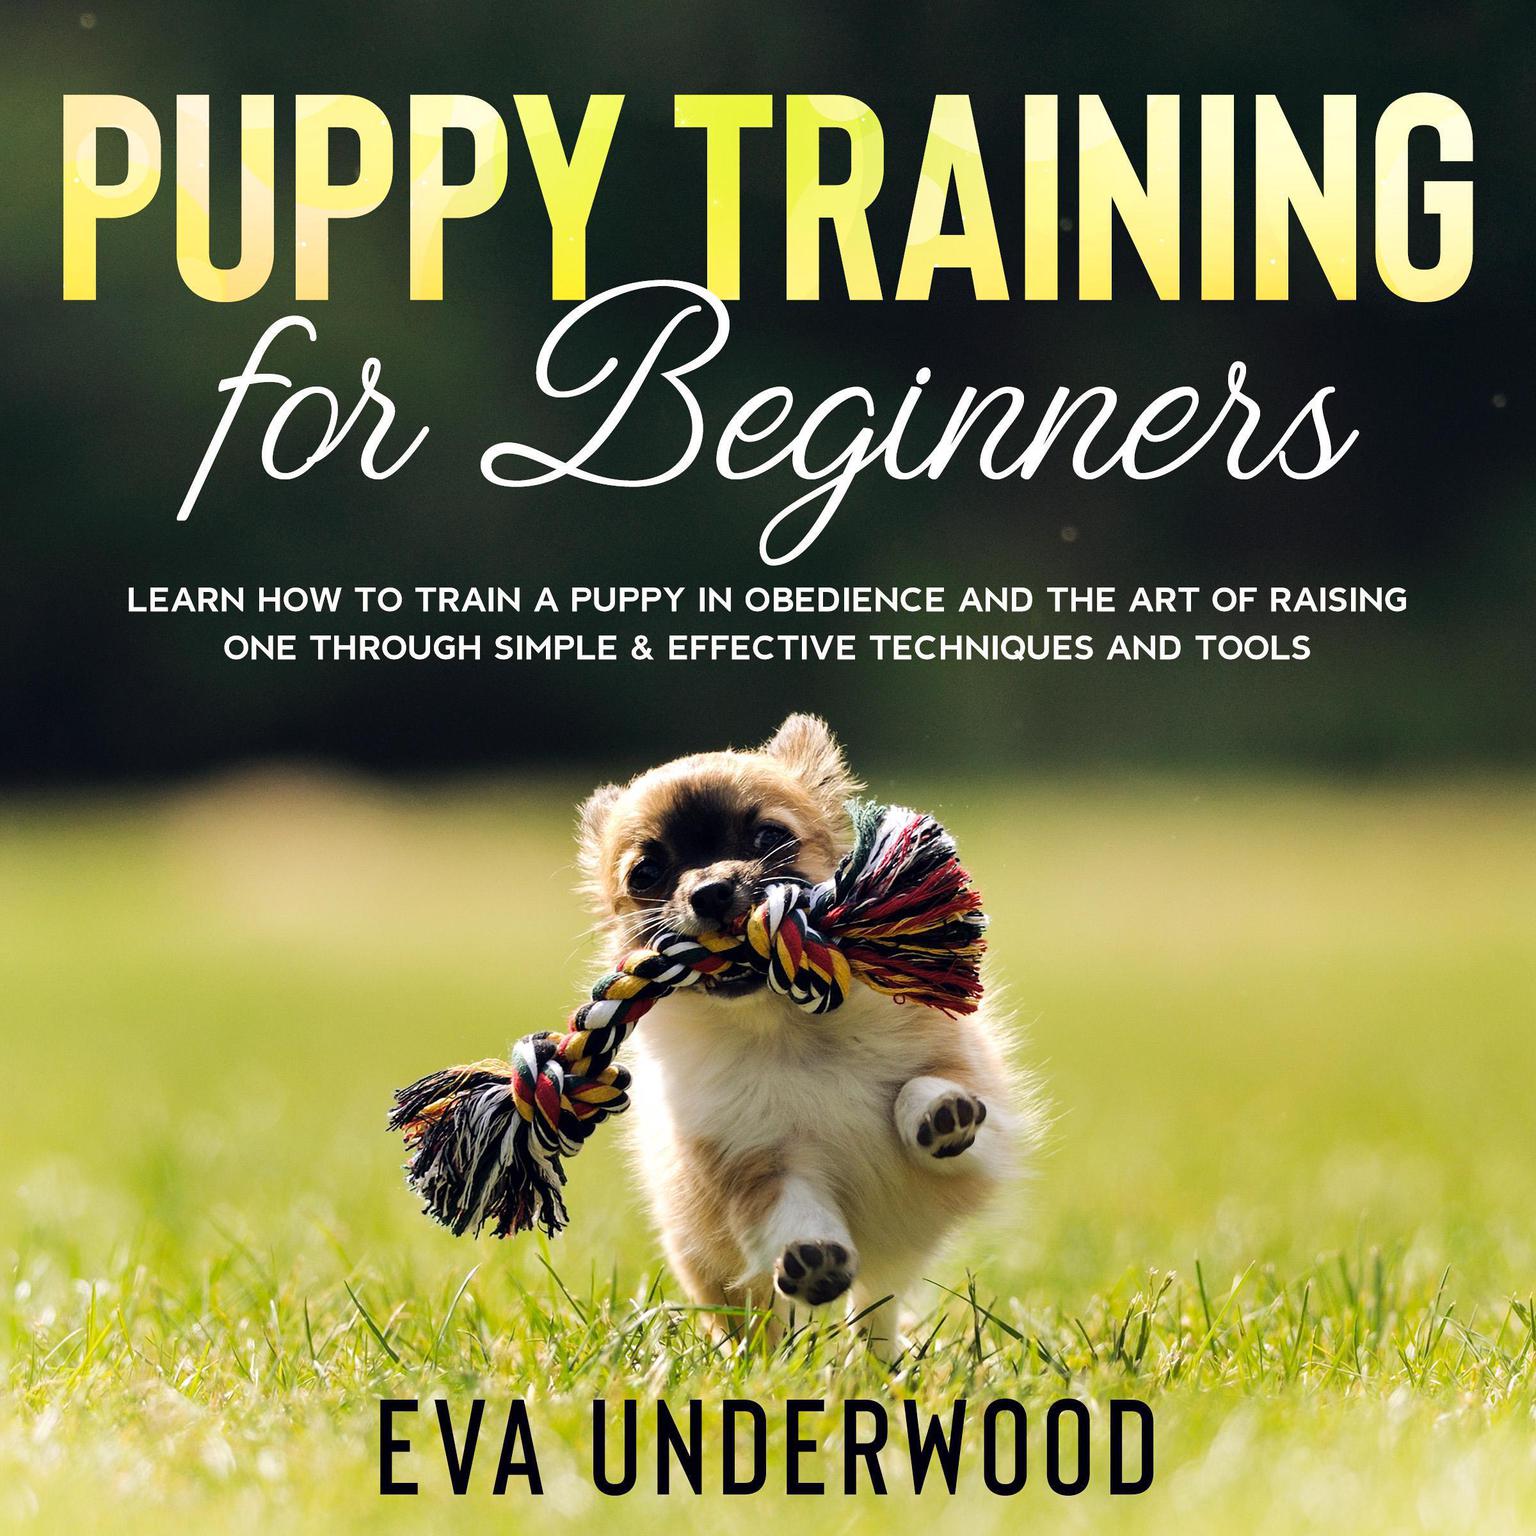 Puppy Training for Beginners: Learn How to Train a Puppy in Obedience and The Art of Raising One through Simple & Effective Techniques and Tools Audiobook, by Eva Underwood